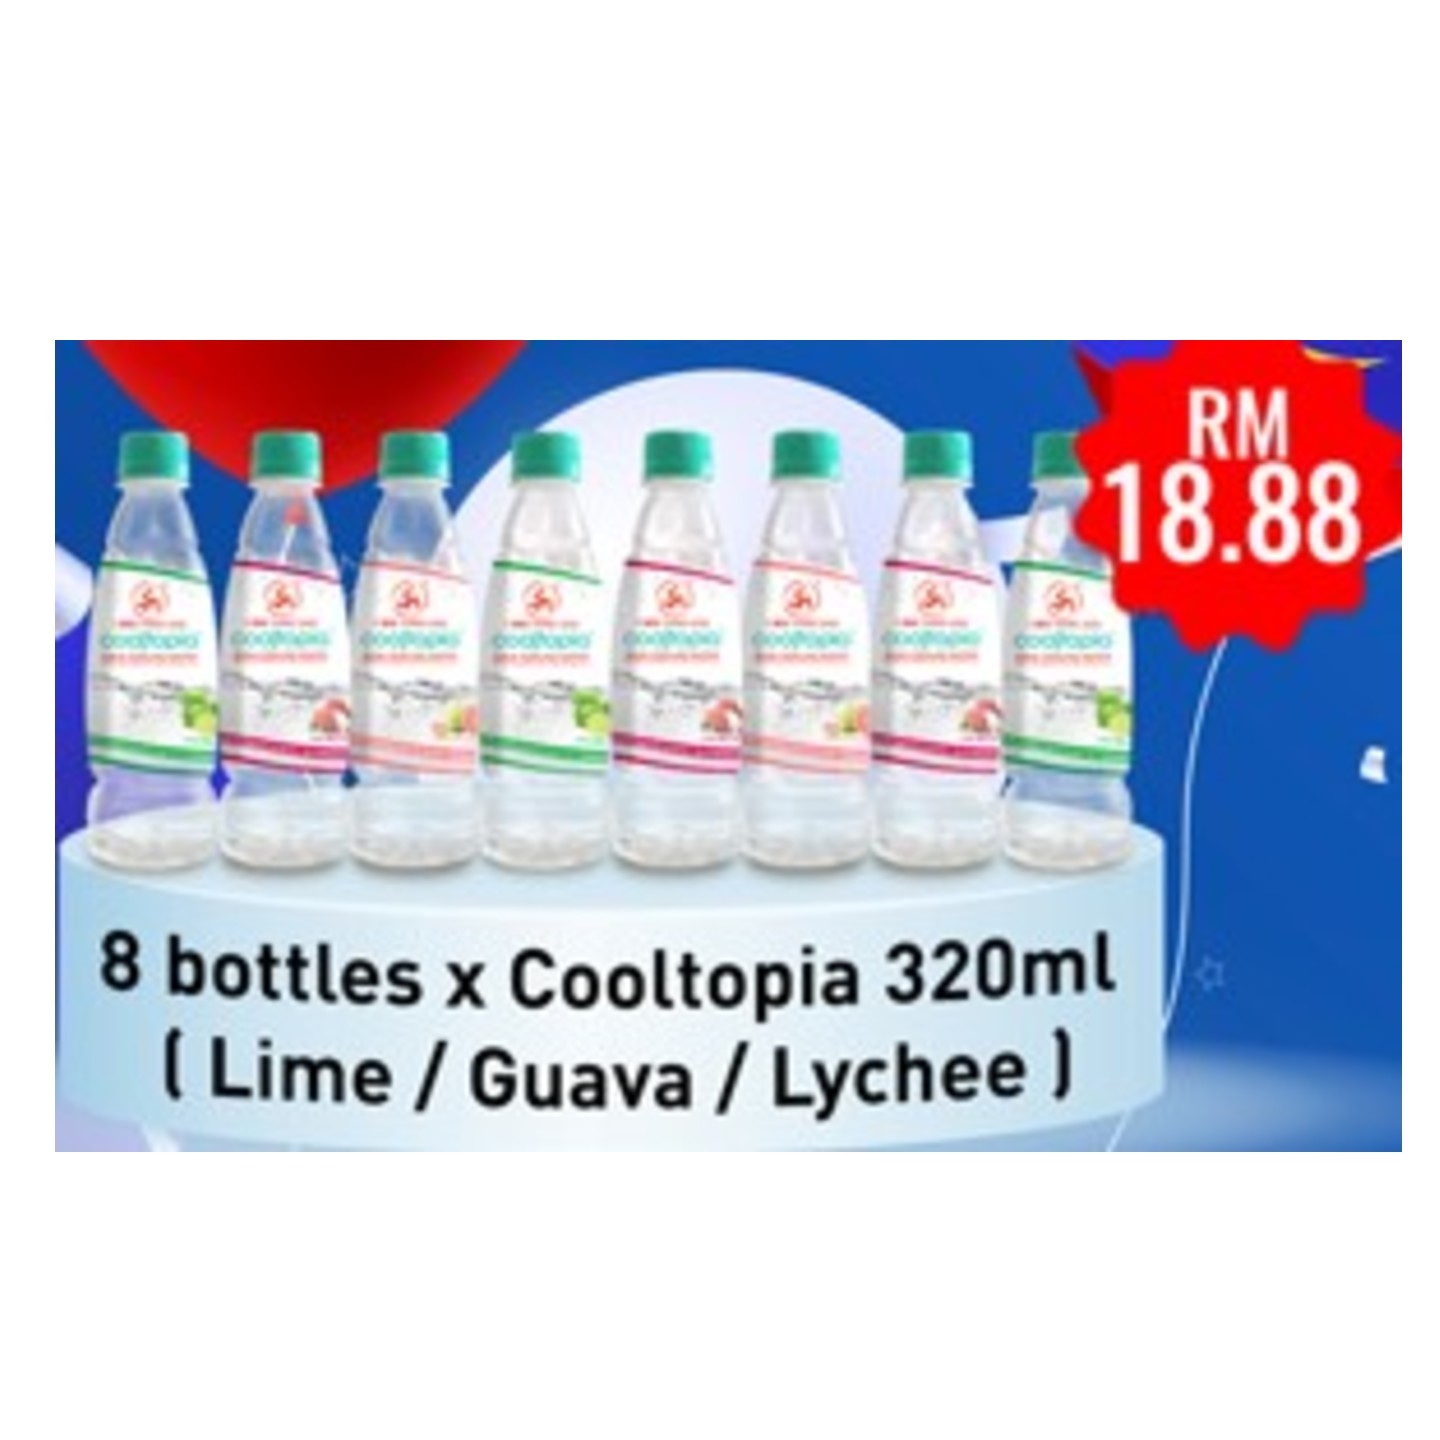 PACKAGE 5: COOLTOPIA COOLING WATER - LYCHEE 320ML X 8